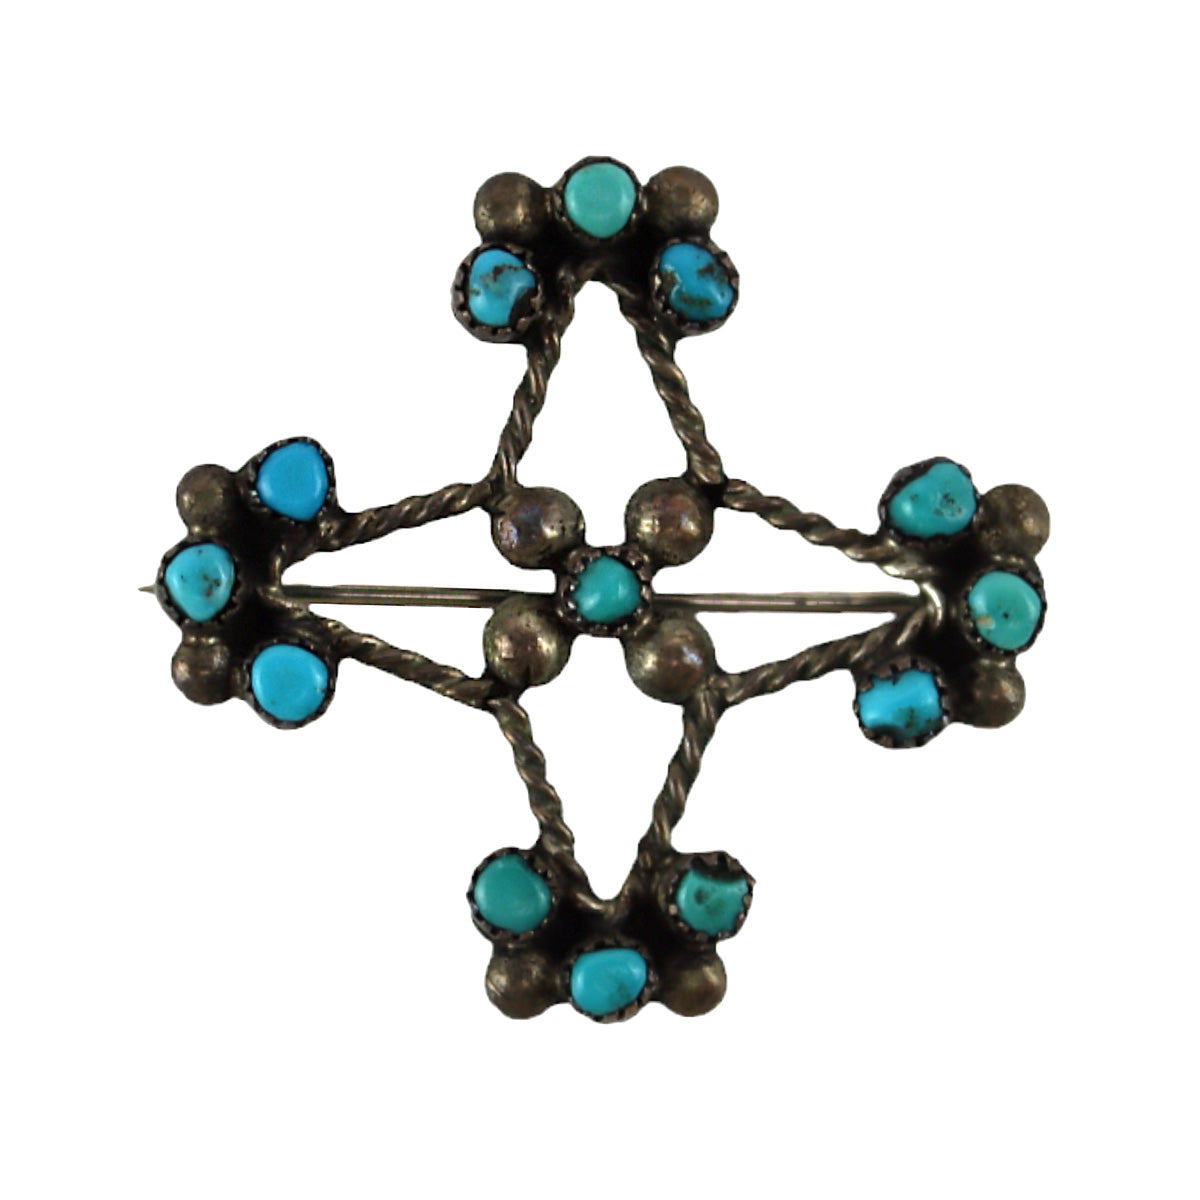 Zuni - Turquoise Petit Point and Silver Pin c. 1940s, 1.25" x 1.25" (J15990-004)